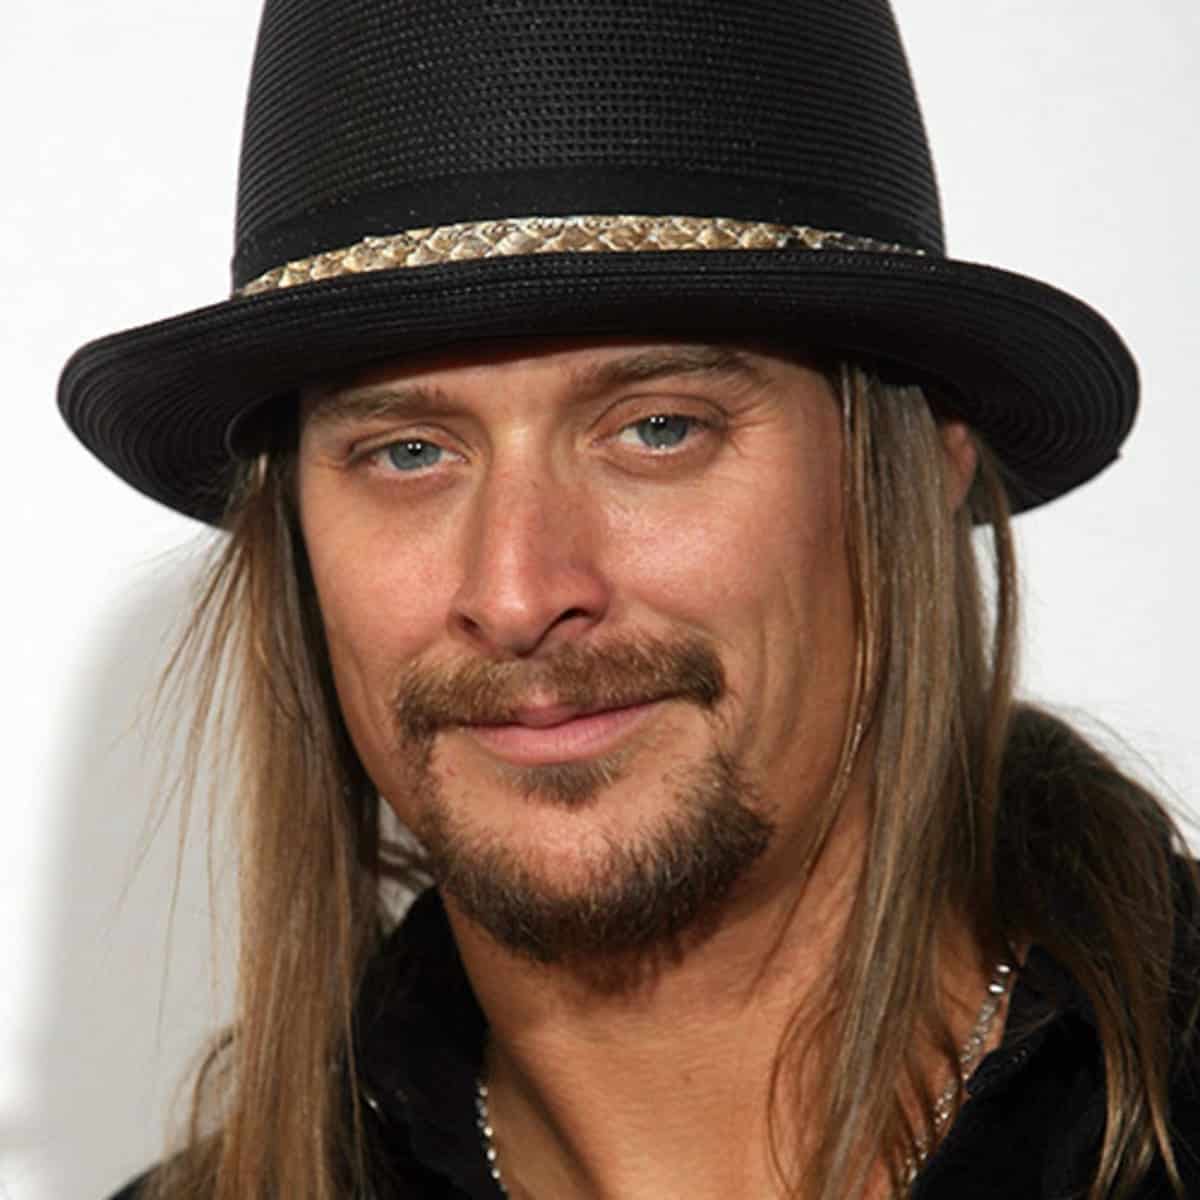 Kid Rock's Net Worth, Height, Age, & Personal Info Wiki The New York